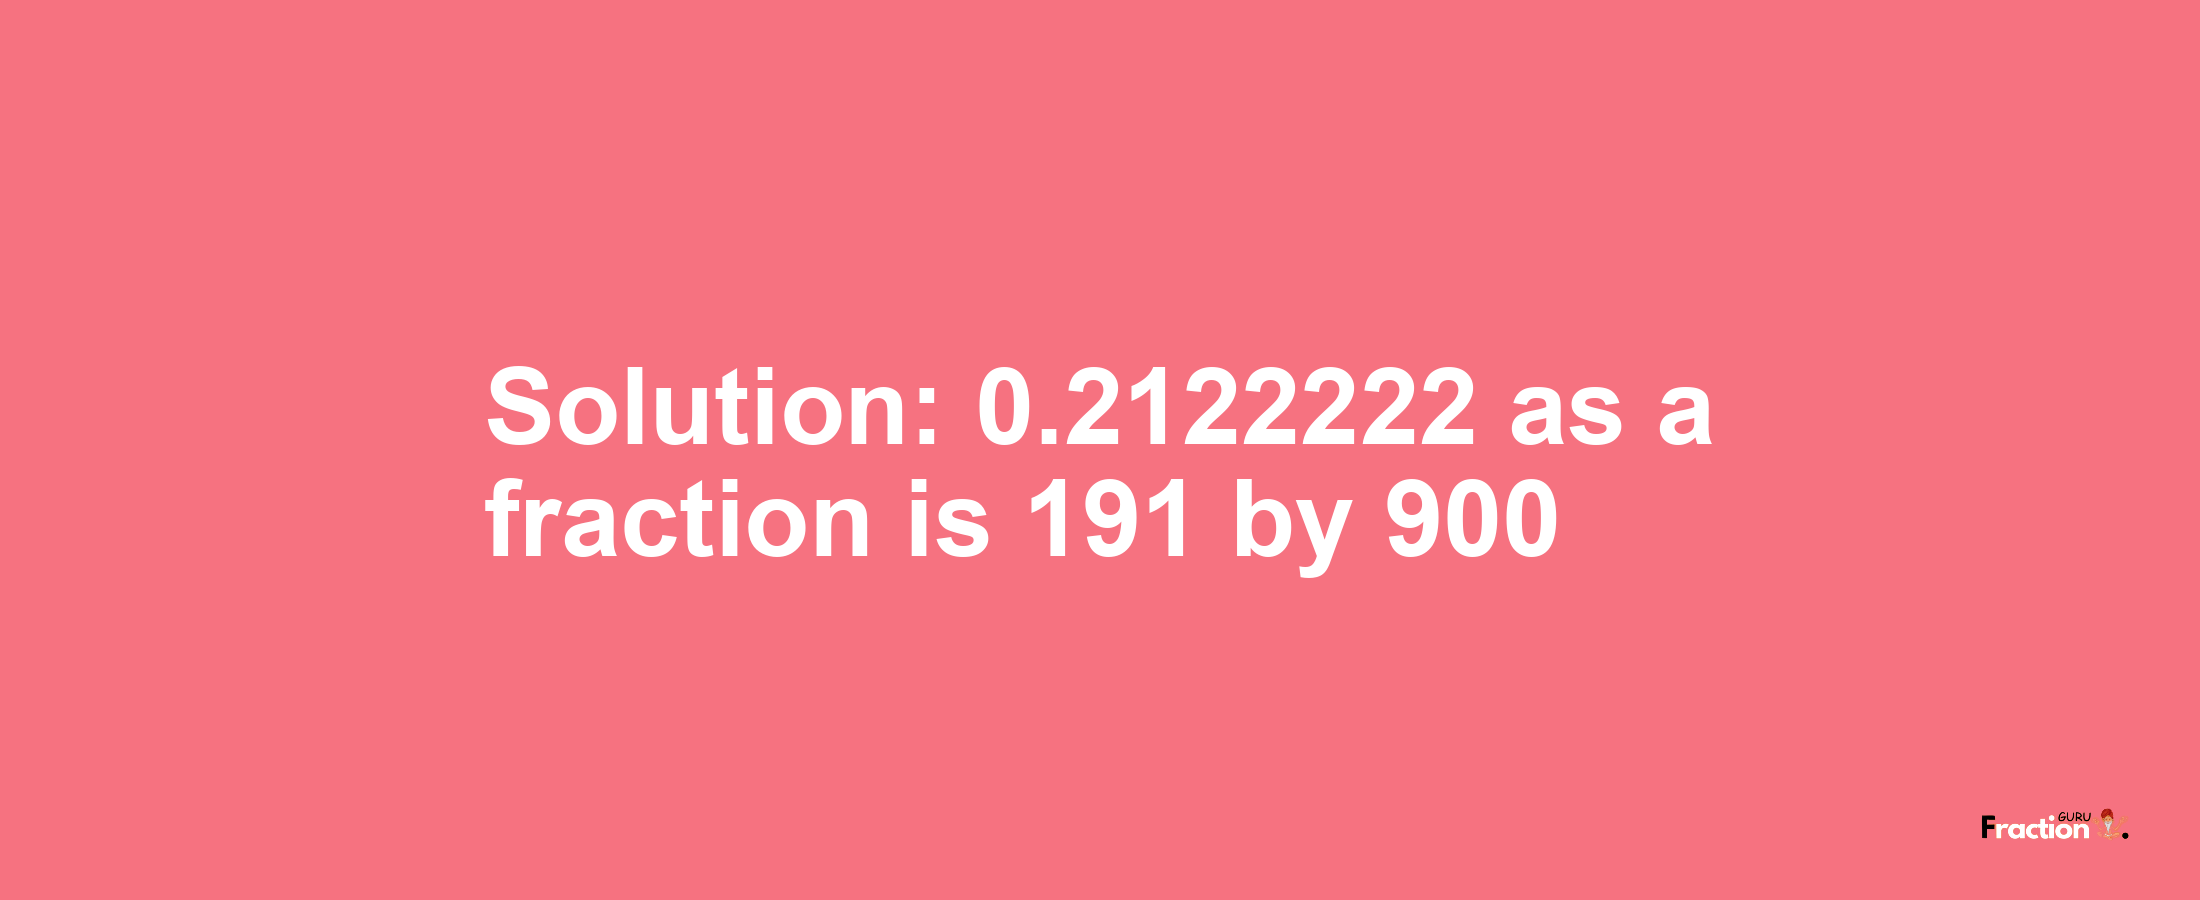 Solution:0.2122222 as a fraction is 191/900